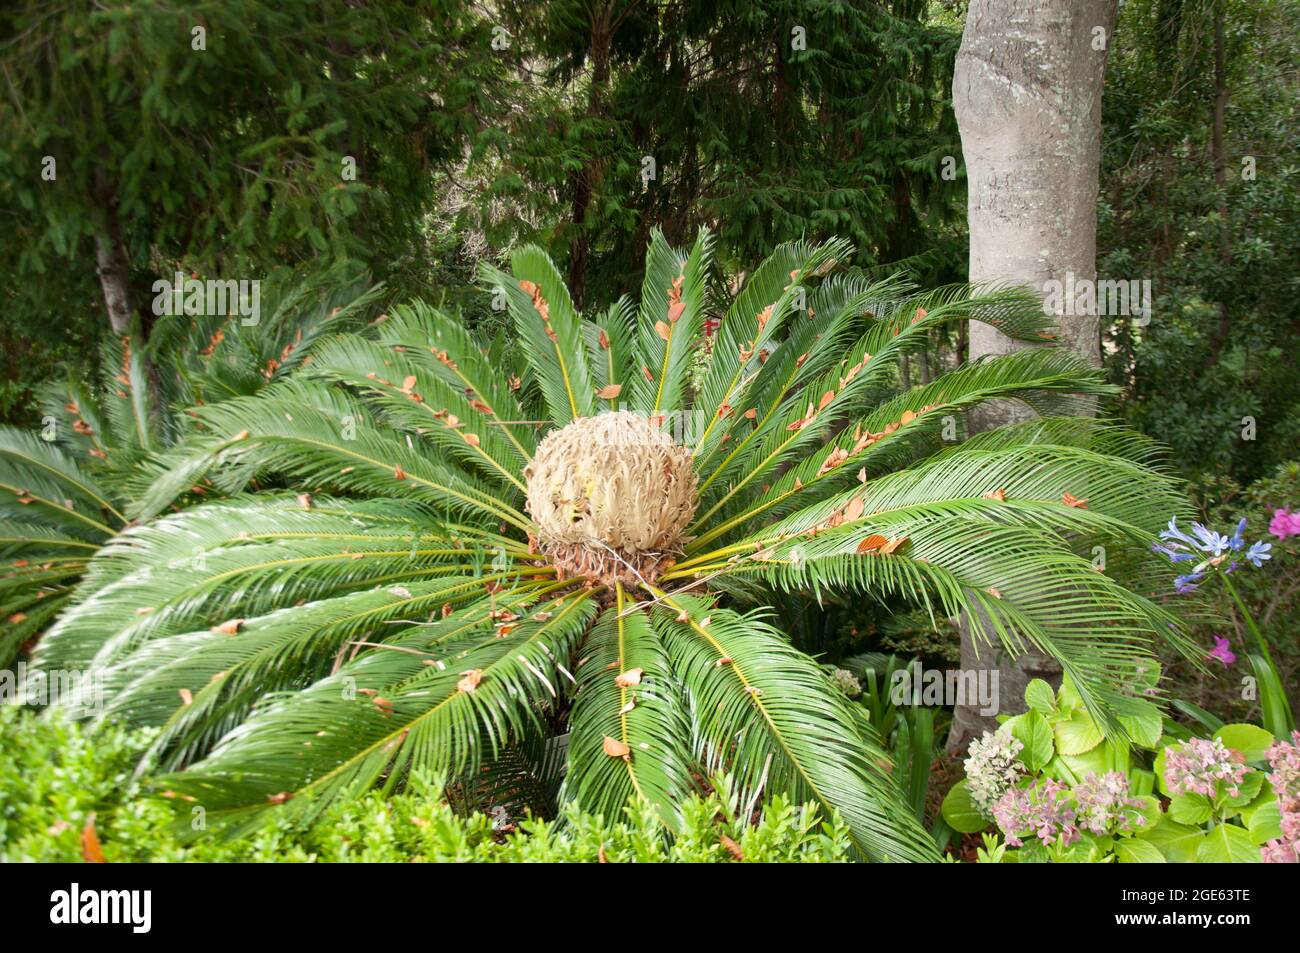 Fern Plant in Seed,Tropical Garden, Monte Palace, Funchal, Madeira, Portugal, Europe Stock Photo